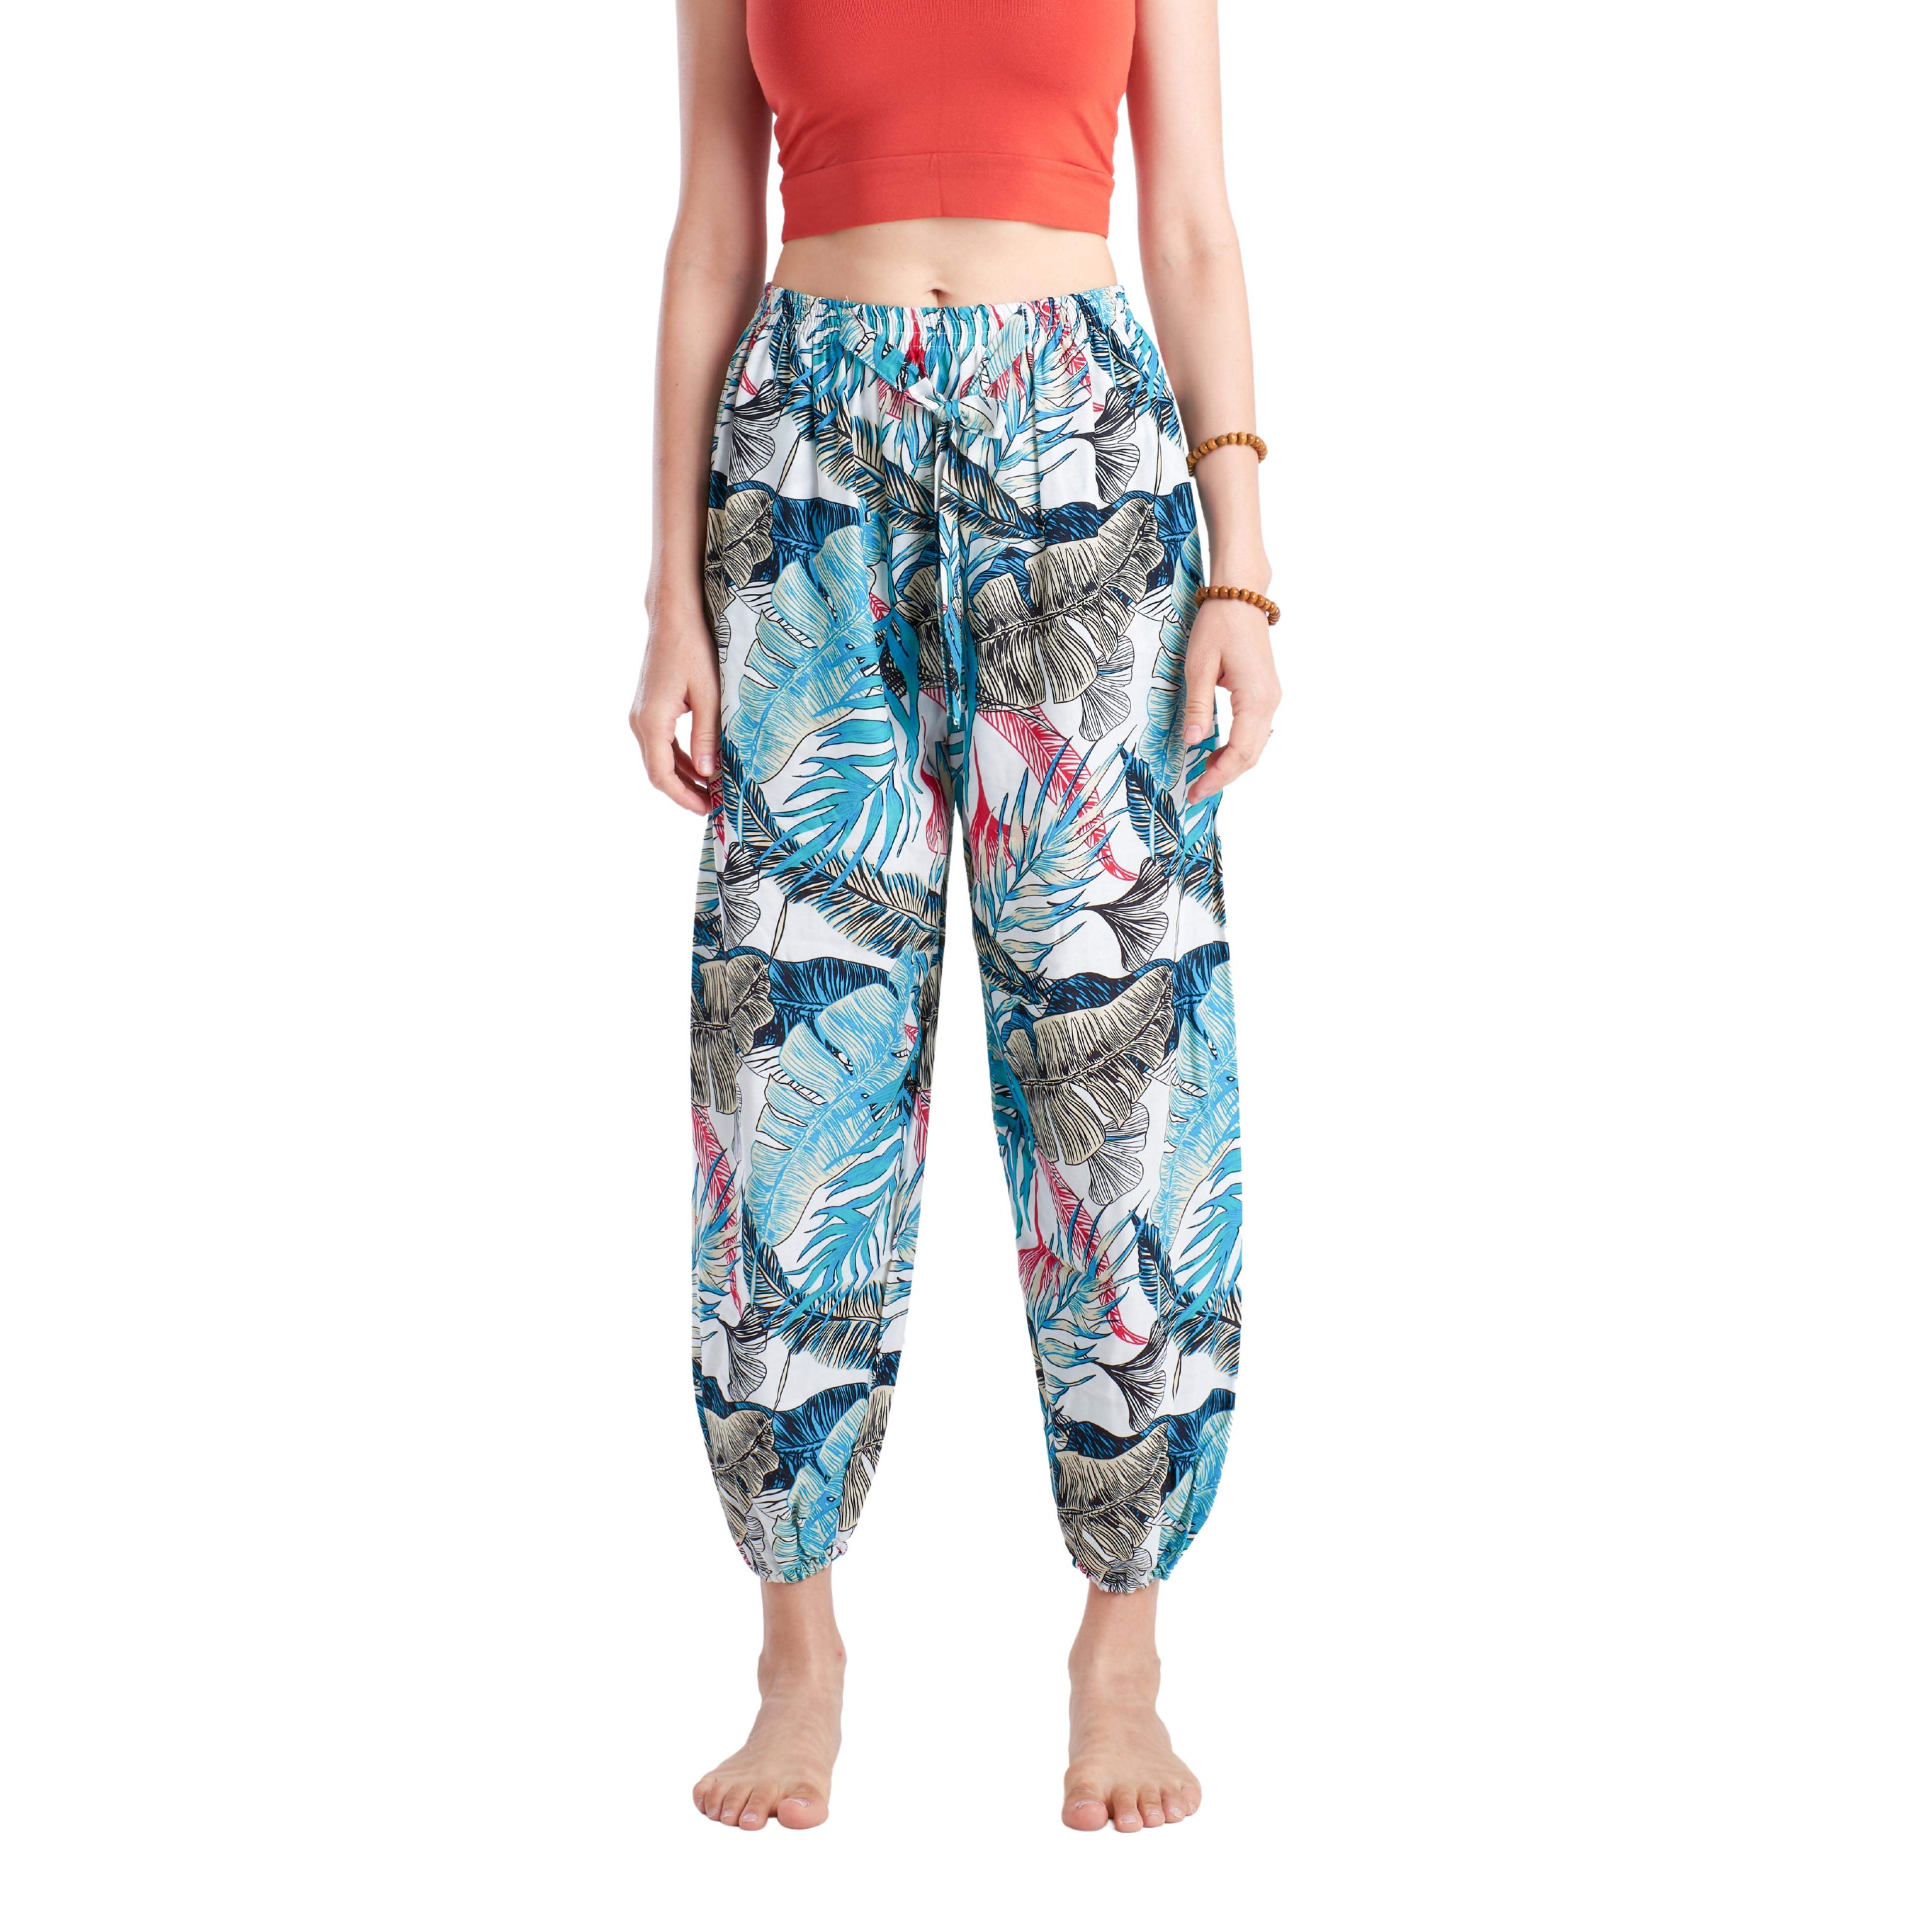 ASWAN HIPPIE PANTS Elepanta Hippie Pants | Drawstring - Buy Today Elephant Pants Jewelry And Bohemian Clothes Handmade In Thailand Help To Save The Elephants FairTrade And Vegan